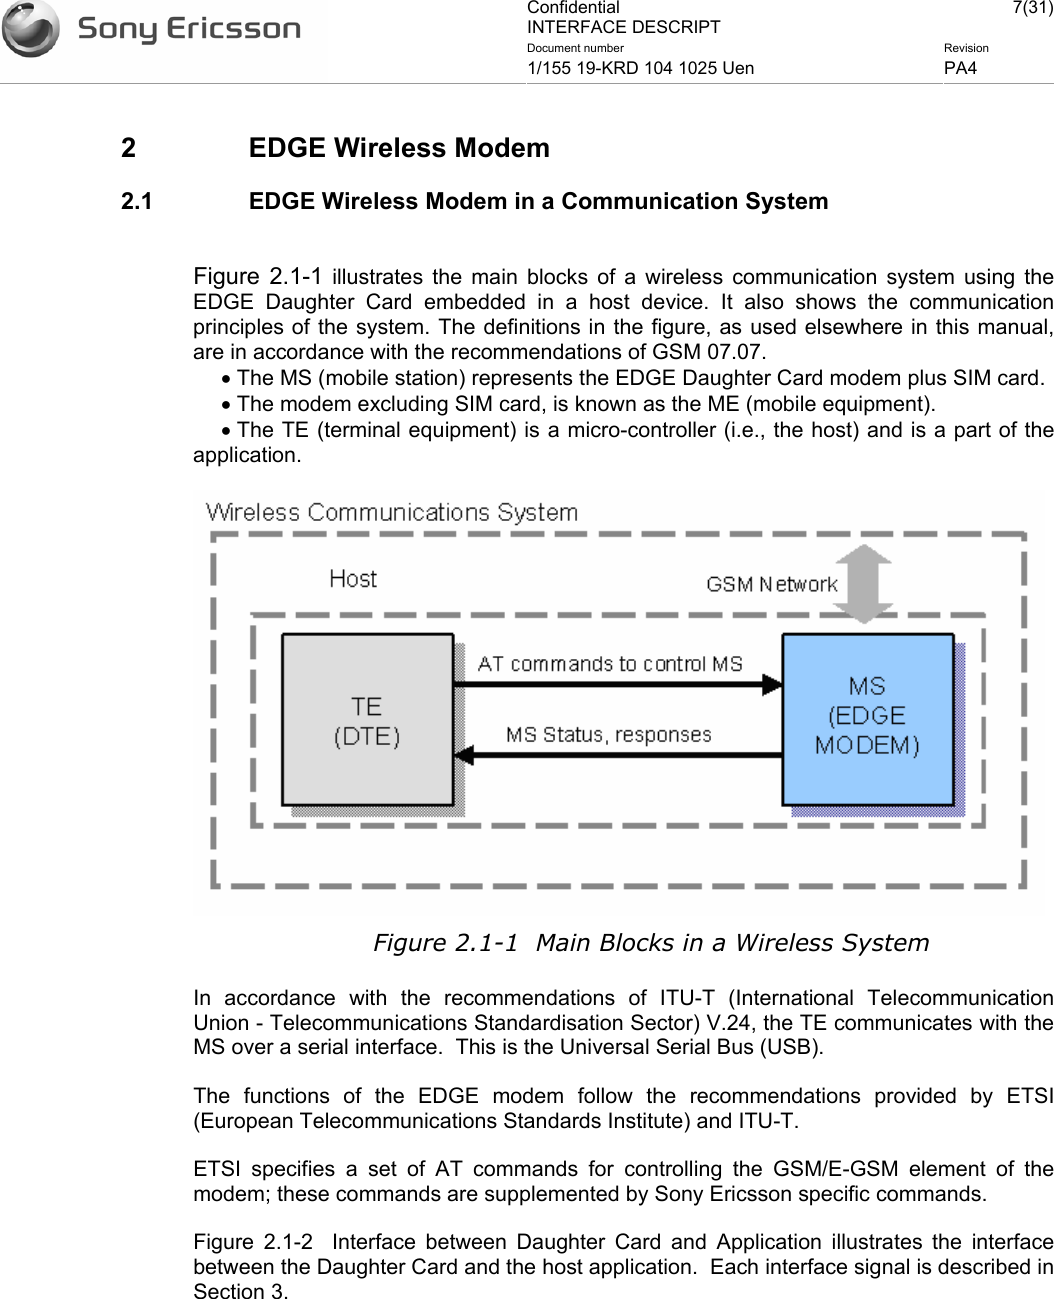 Confidential INTERFACE DESCRIPT 7(31)Document number  Revision 1/155 19-KRD 104 1025 Uen  PA4    2  EDGE Wireless Modem 2.1  EDGE Wireless Modem in a Communication System  Figure 2.1-1 illustrates the main blocks of a wireless communication system using the EDGE Daughter Card embedded in a host device. It also shows the communication principles of the system. The definitions in the figure, as used elsewhere in this manual, are in accordance with the recommendations of GSM 07.07. • The MS (mobile station) represents the EDGE Daughter Card modem plus SIM card.  • The modem excluding SIM card, is known as the ME (mobile equipment). • The TE (terminal equipment) is a micro-controller (i.e., the host) and is a part of the application.  Figure 2.1-1  Main Blocks in a Wireless System In accordance with the recommendations of ITU-T (International Telecommunication Union - Telecommunications Standardisation Sector) V.24, the TE communicates with the MS over a serial interface.  This is the Universal Serial Bus (USB). The functions of the EDGE modem follow the recommendations provided by ETSI (European Telecommunications Standards Institute) and ITU-T. ETSI specifies a set of AT commands for controlling the GSM/E-GSM element of the modem; these commands are supplemented by Sony Ericsson specific commands. Figure 2.1-2  Interface between Daughter Card and Application illustrates the interface between the Daughter Card and the host application.  Each interface signal is described in Section 3.  